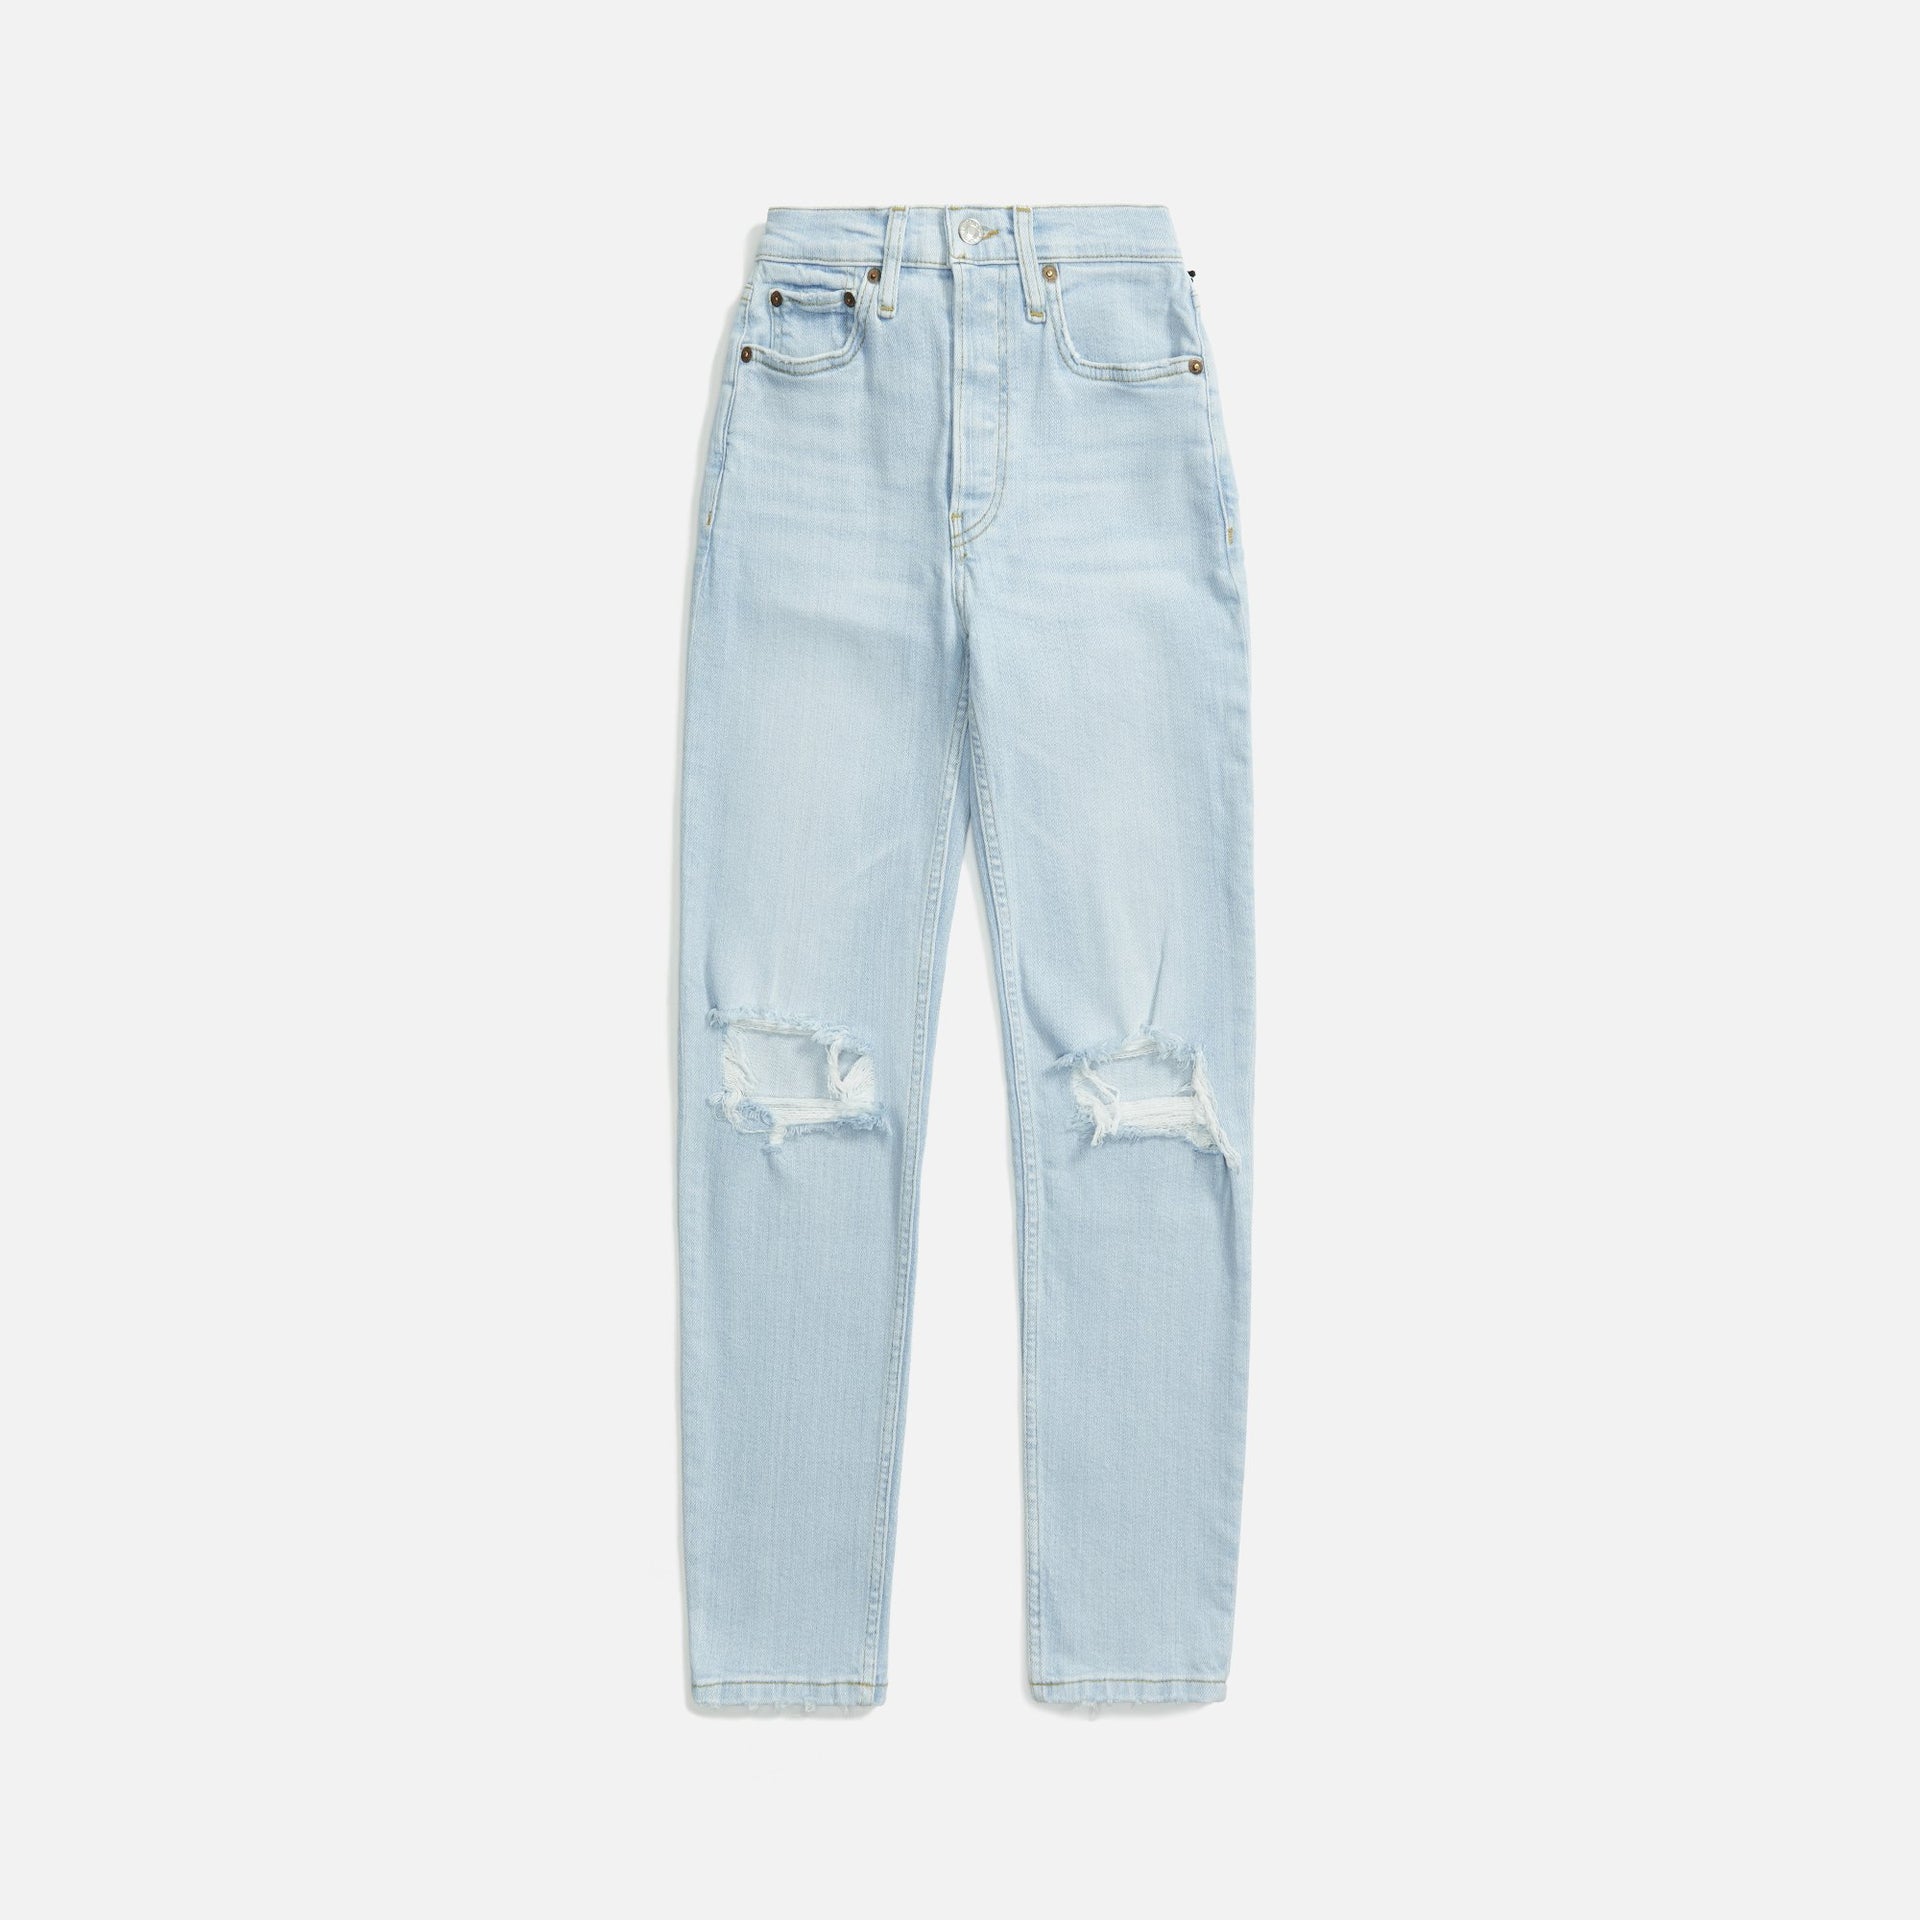 ReDone 90s High Rise Ankle Crop - Destroyed Icy Blue